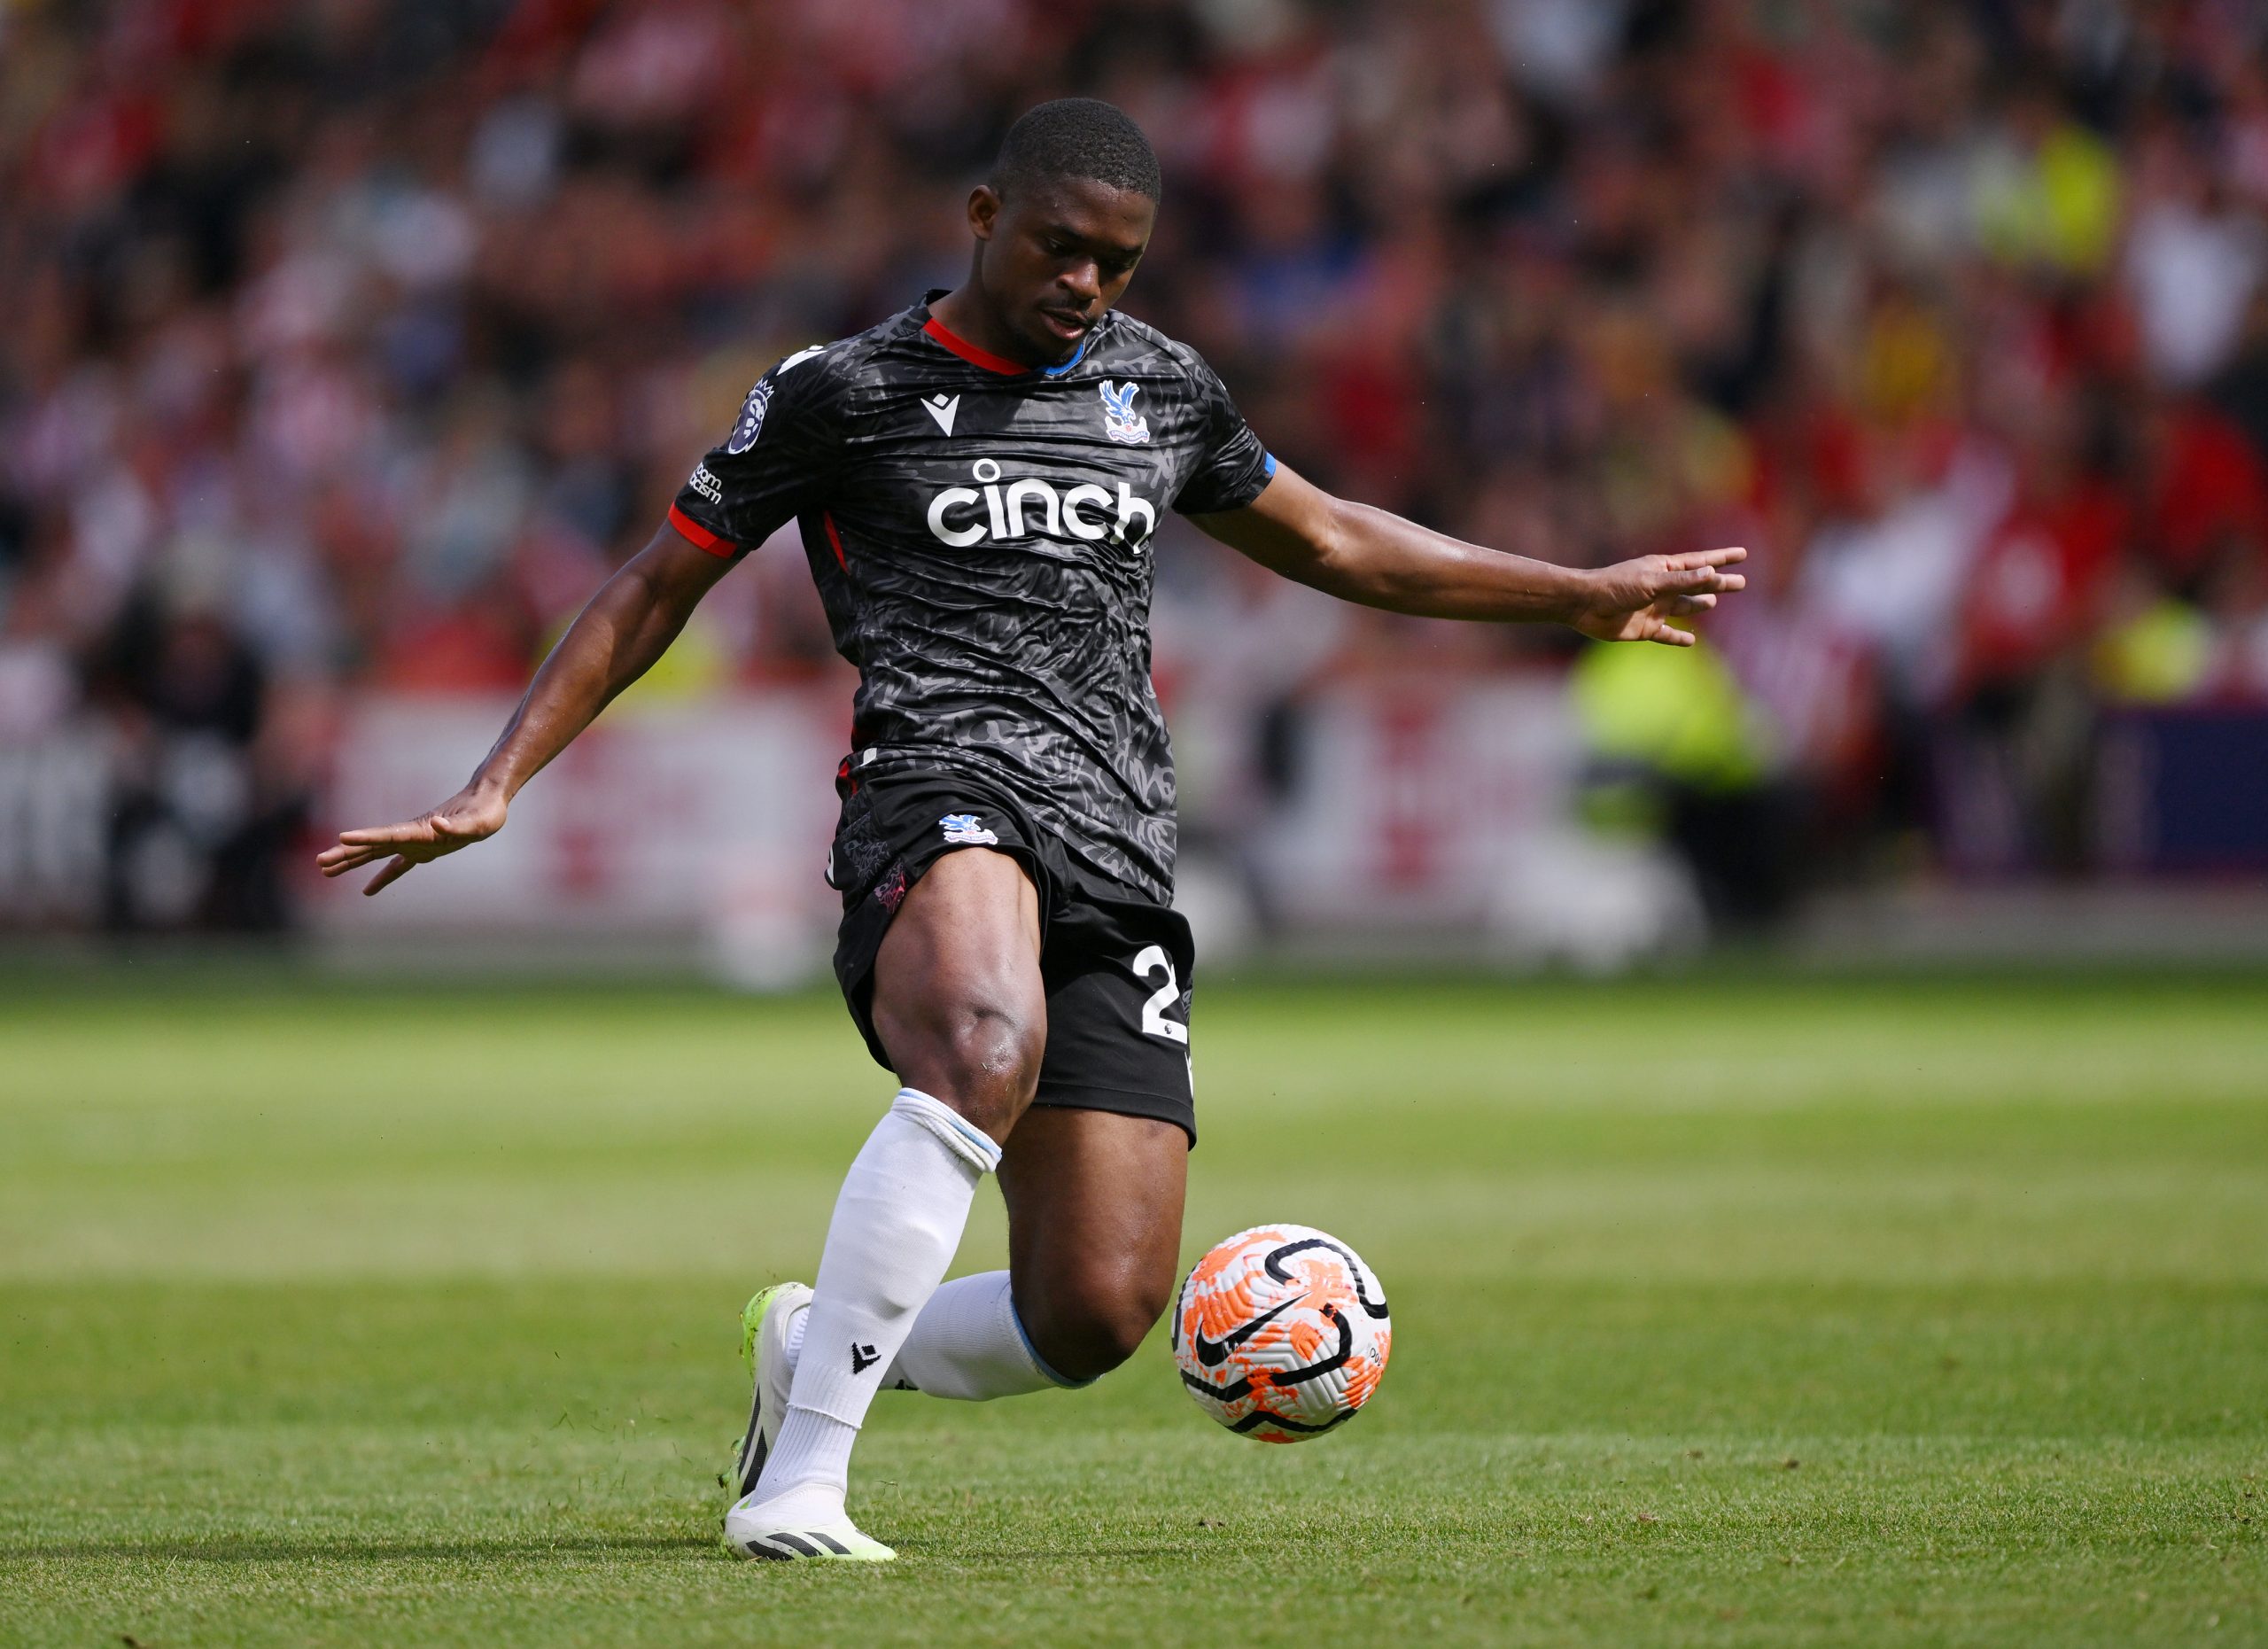 SHEFFIELD, ENGLAND - AUGUST 12: Cheick Doucoure of Crystal Palace runs with the ball during the Premier League match between Sheffield United and Crystal Palace at Bramall Lane on August 12, 2023 in Sheffield, England. (Photo by Laurence Griffiths/Getty Images)